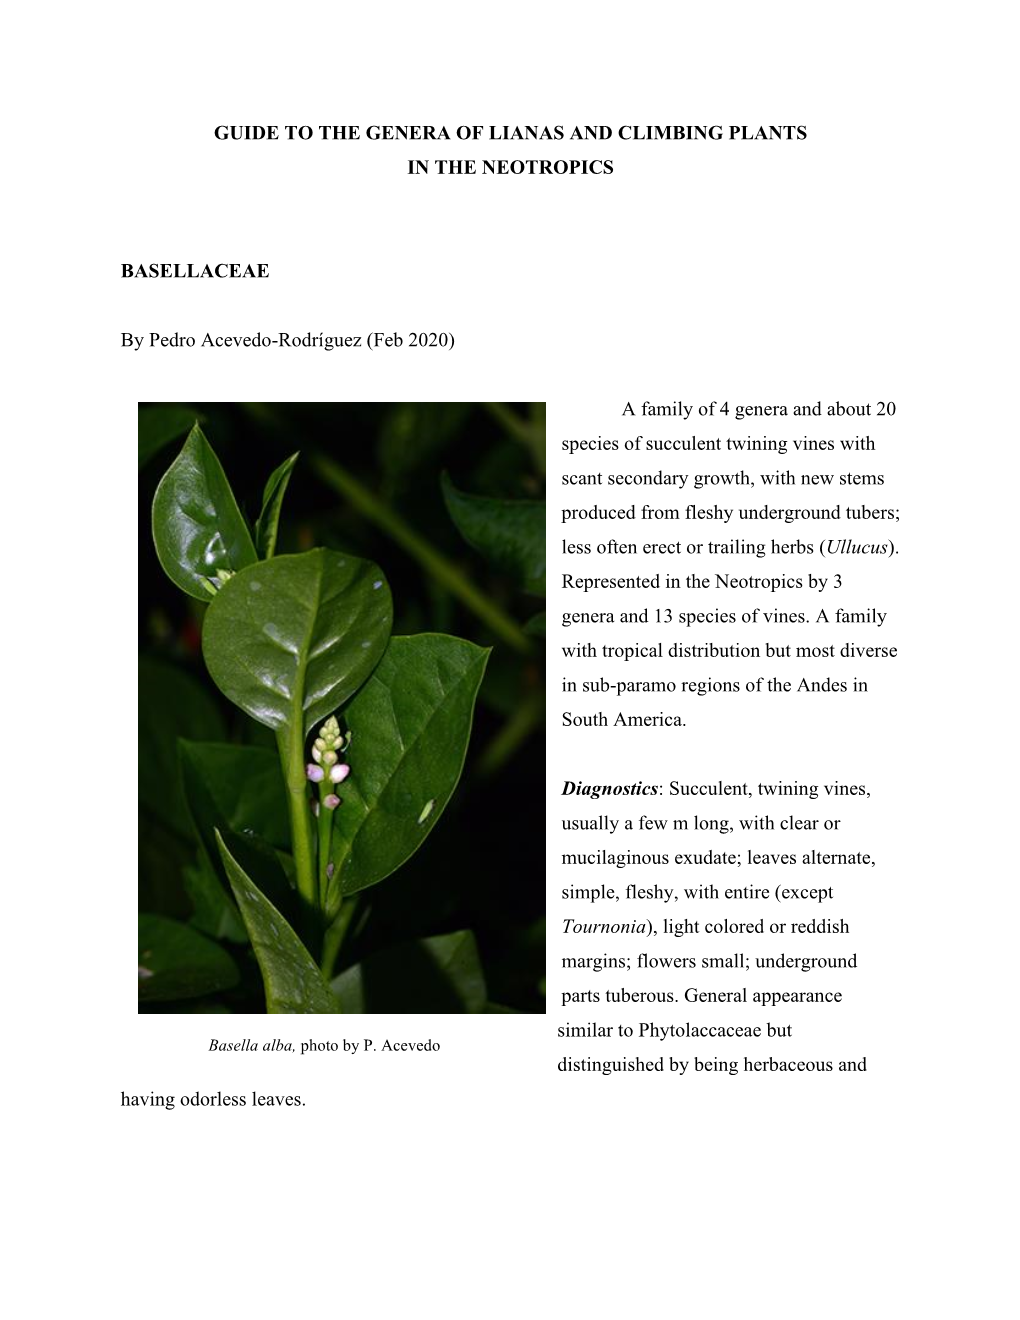 Lianas and Climbing Plants of the Neotropics: Basellaceae